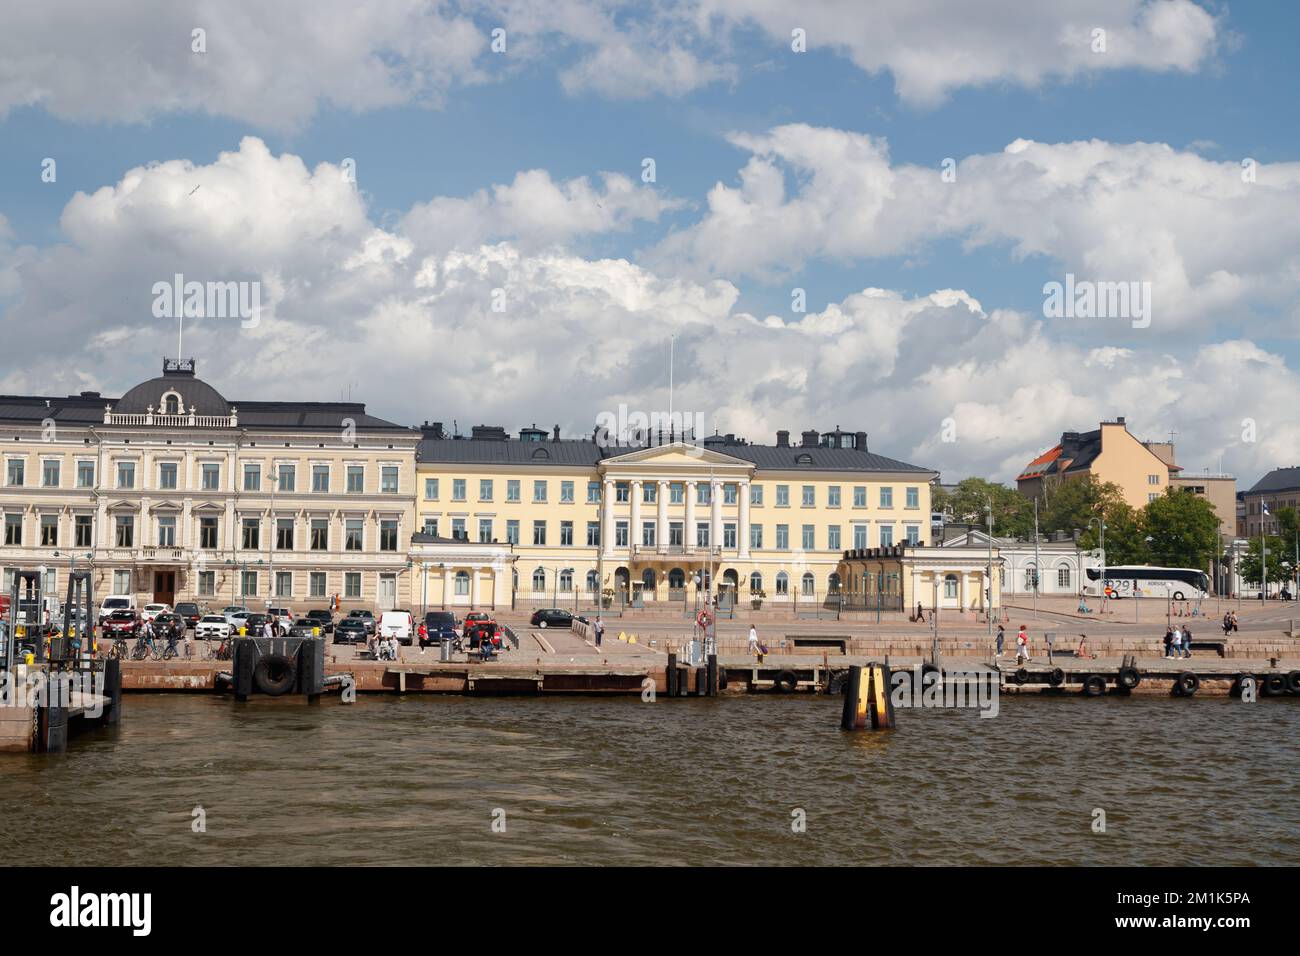 Helsinki, Finland - 12 June 2022: Building of Presidential Palace. Stock Photo